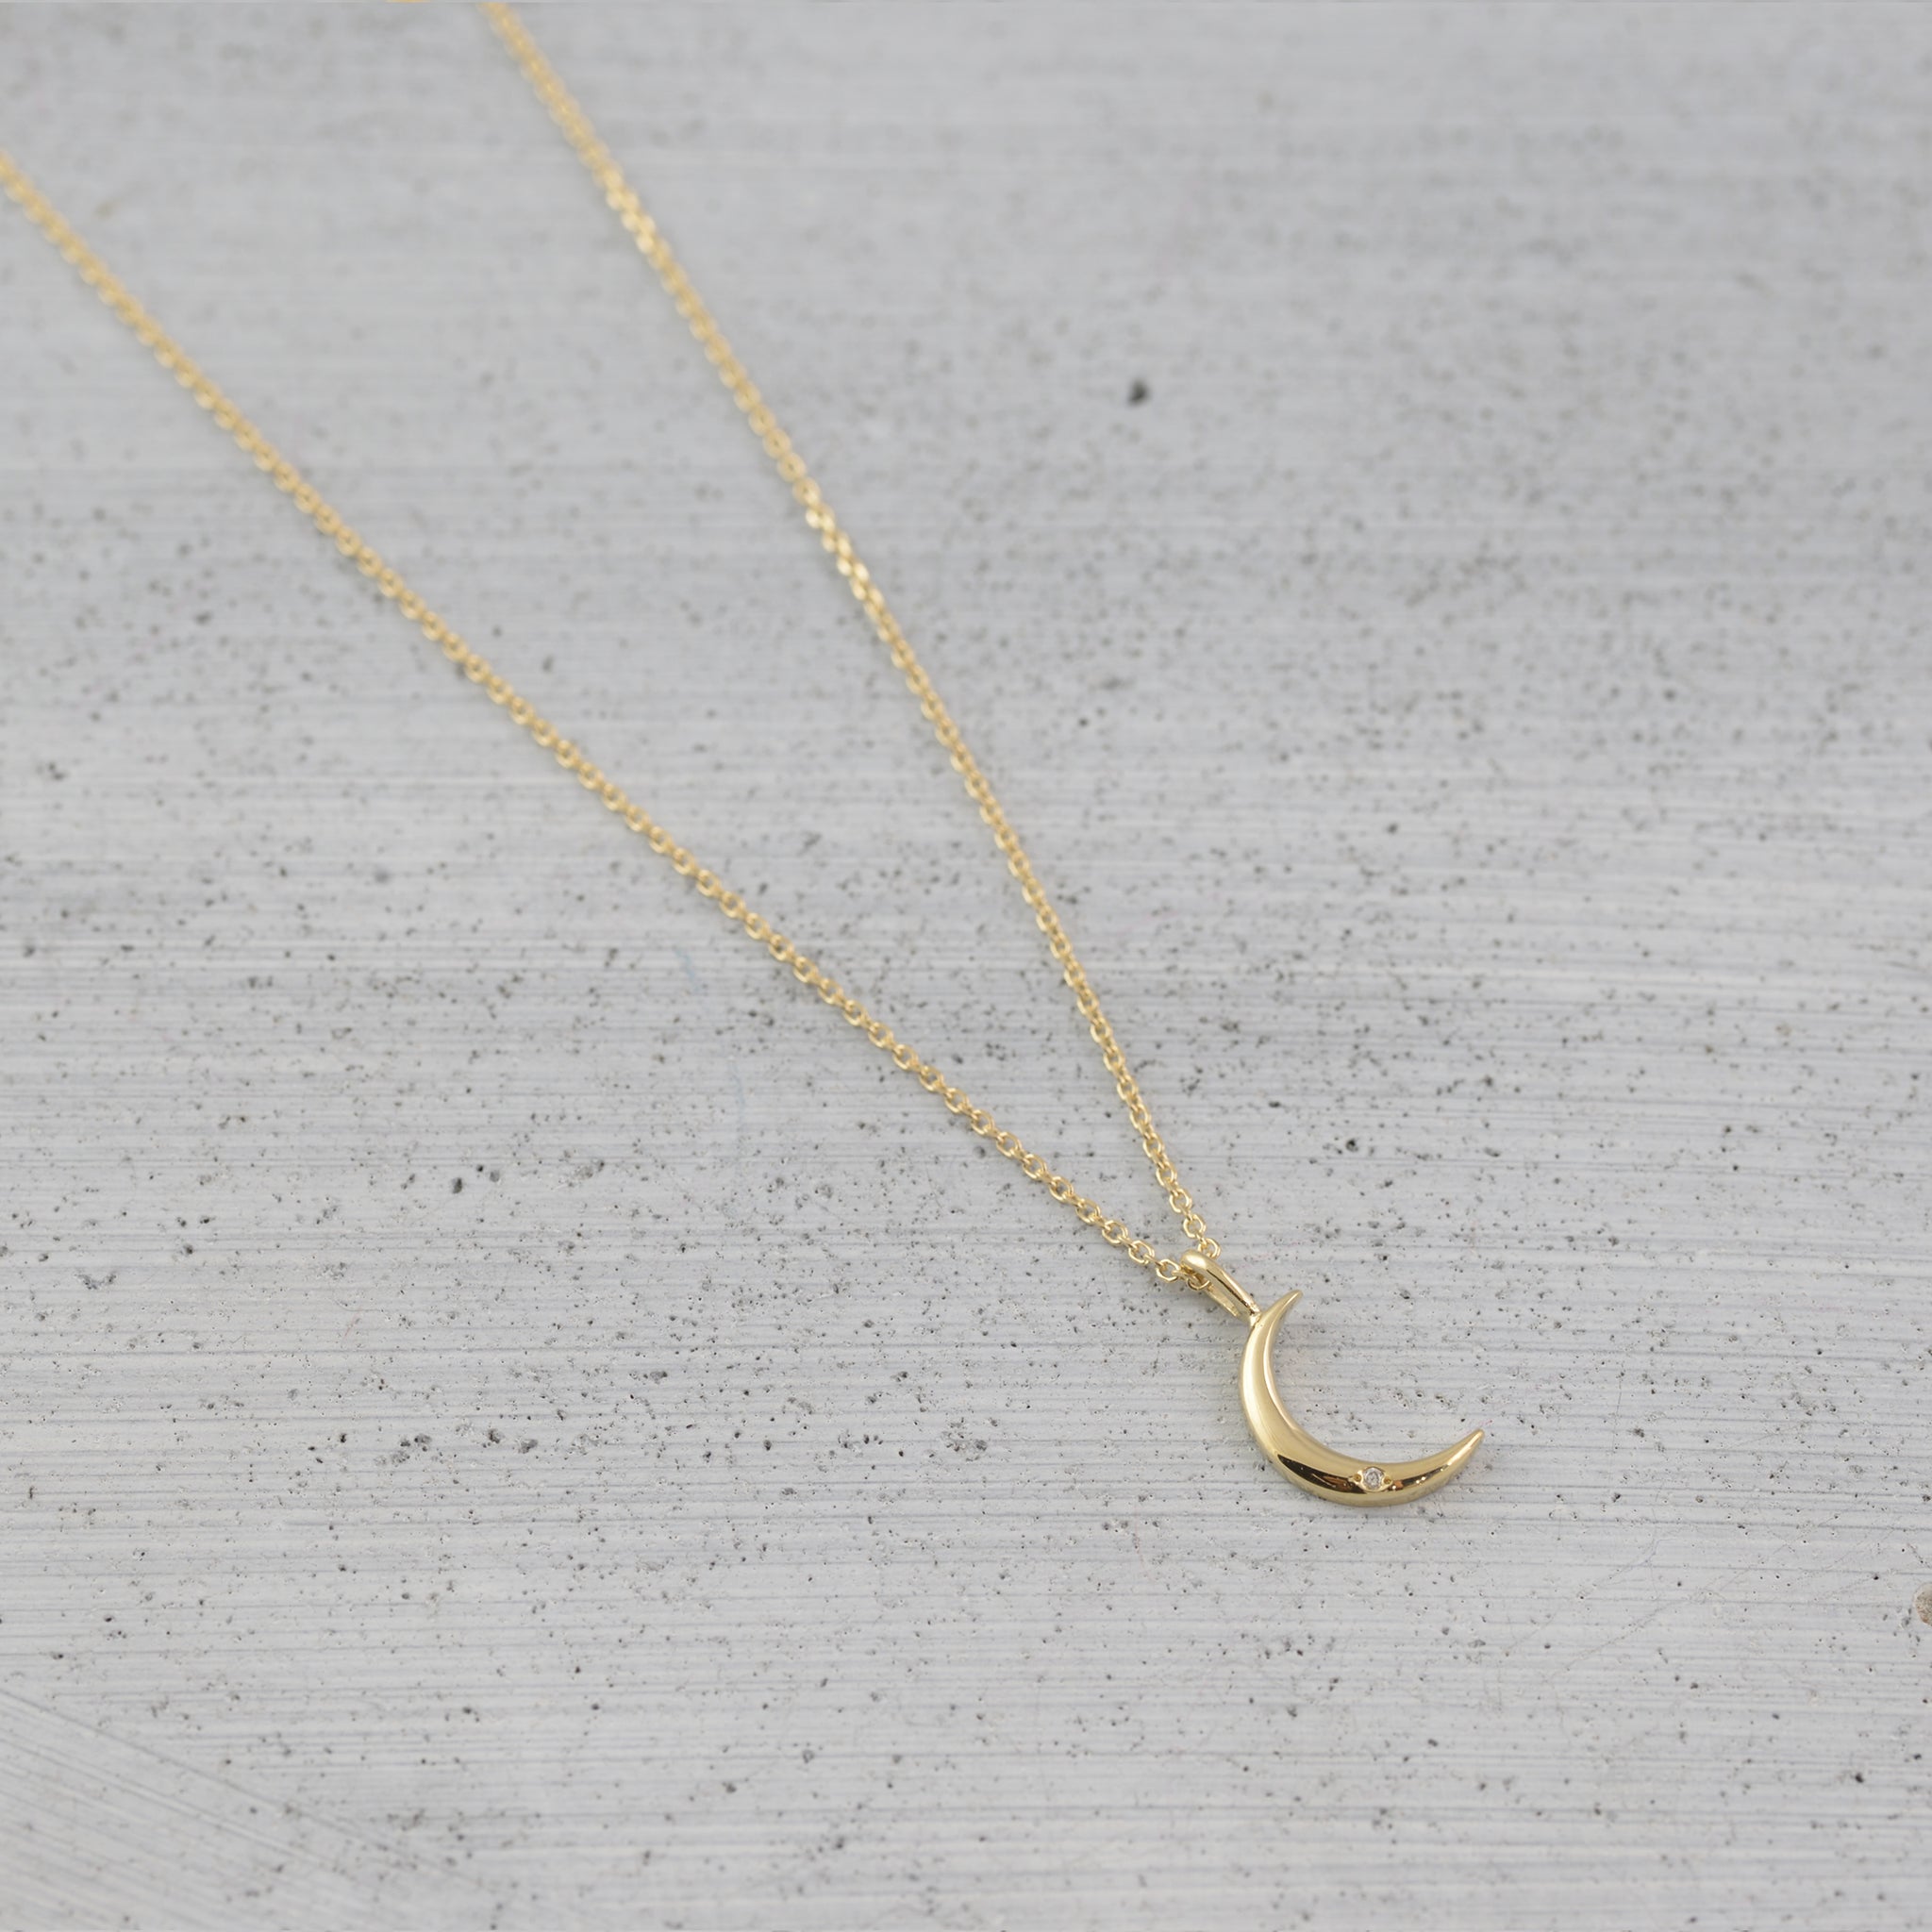 New moon Necklace - 14K/ 18K Gold